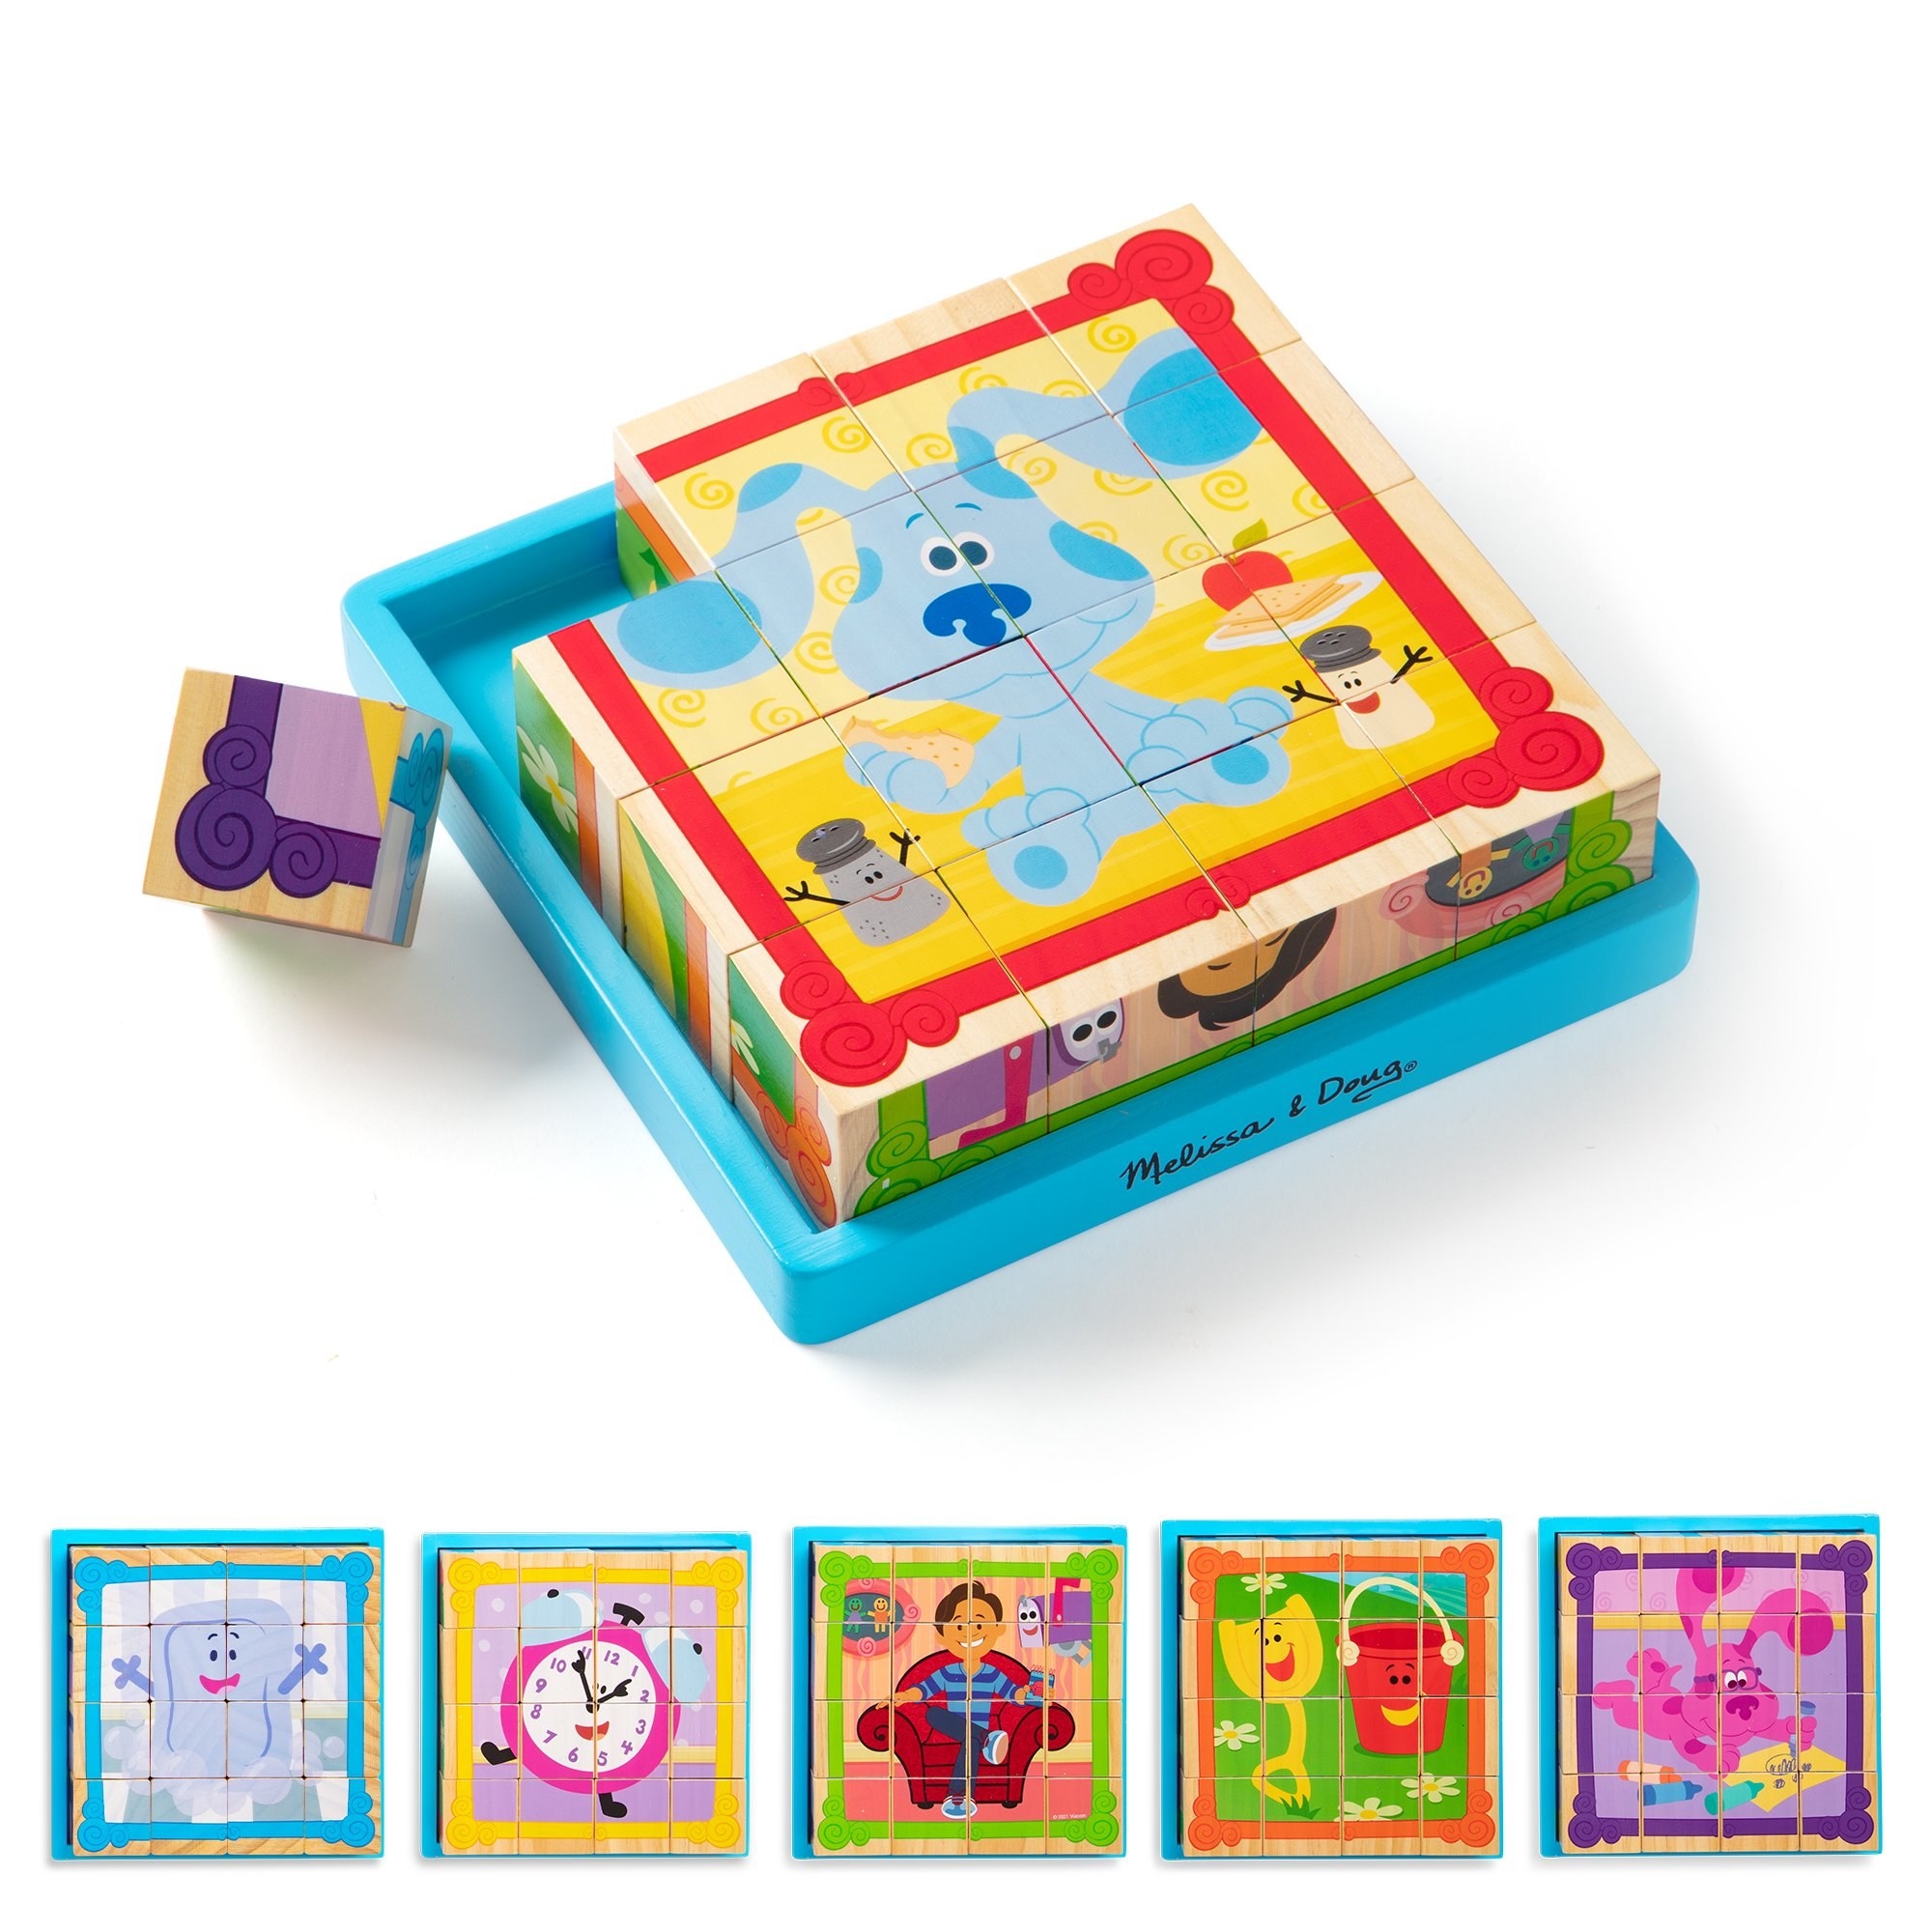 A Blue&#x27;s Clues puzzle that has six different displays